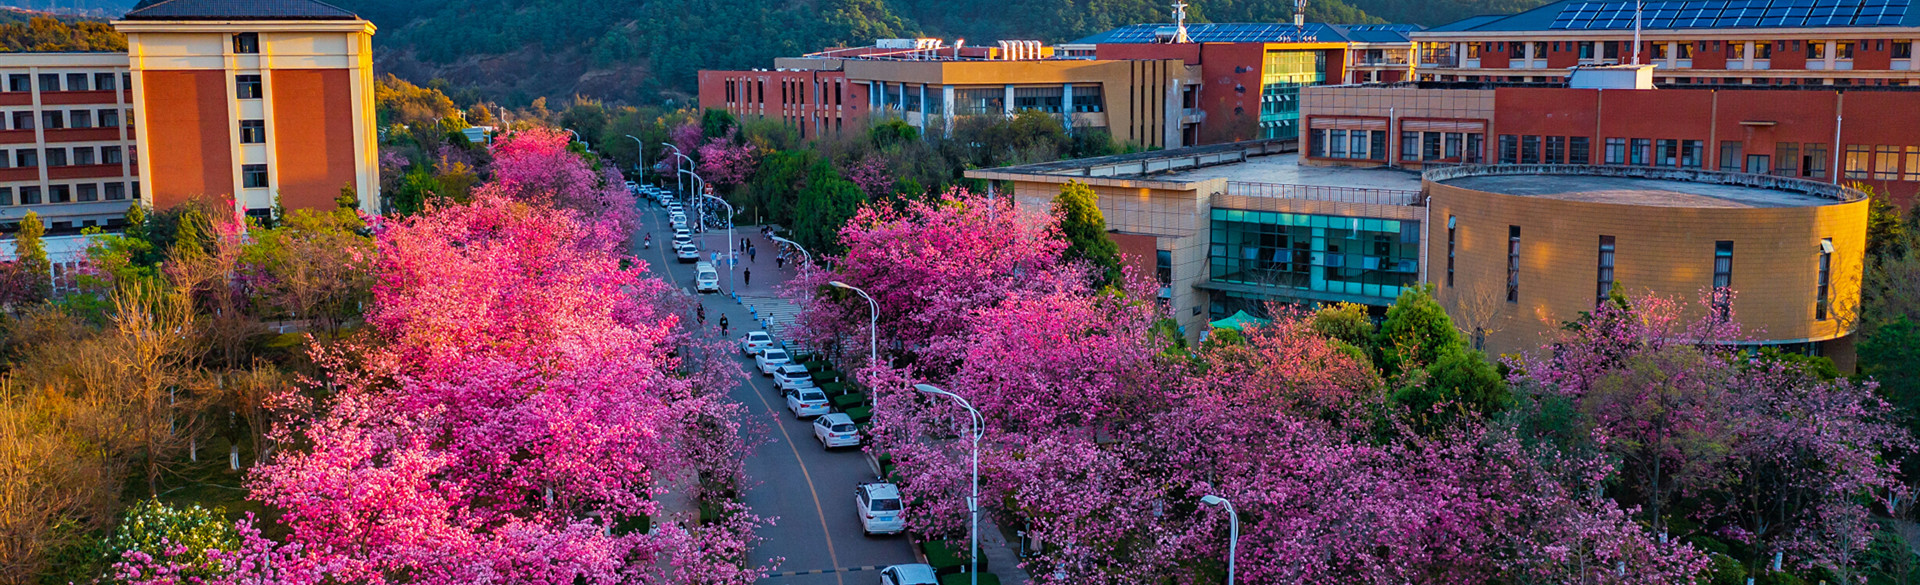 Spring, cherry blossoms come to Yunnan University